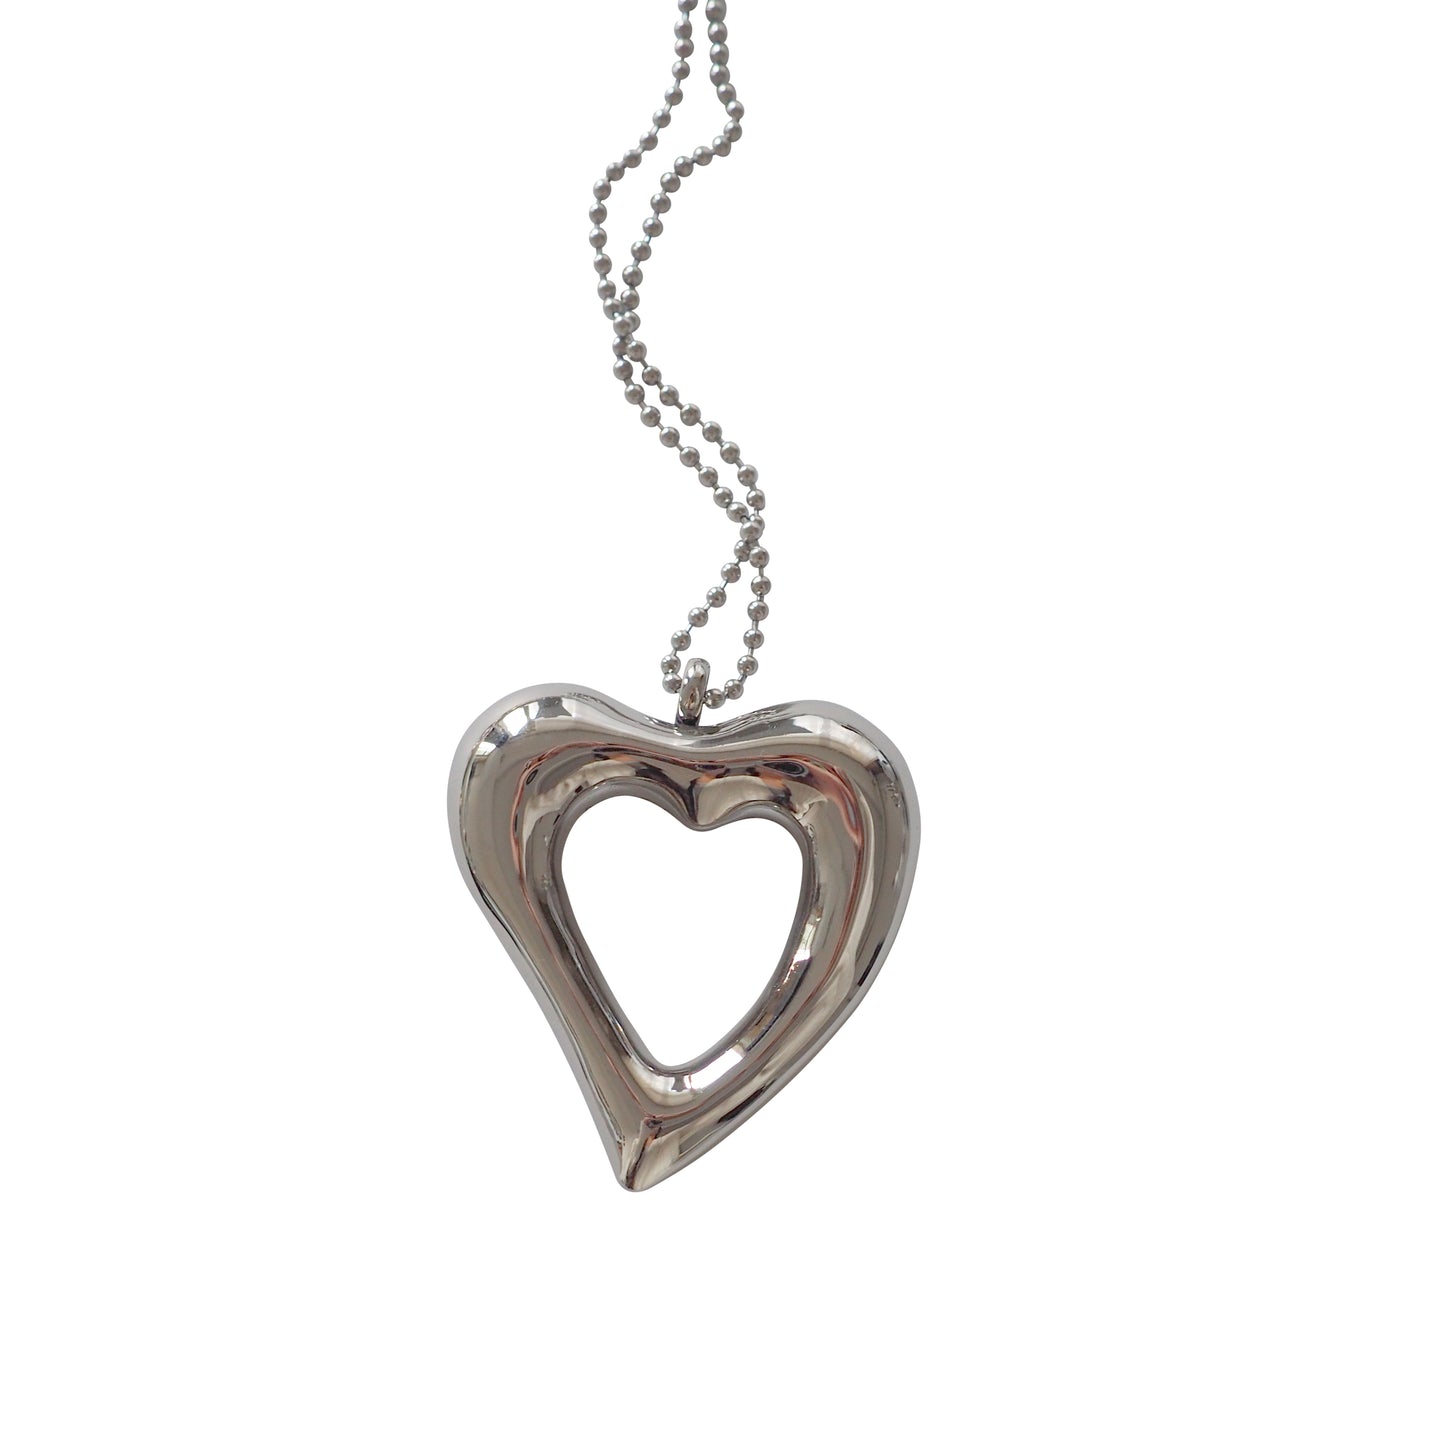 AMORE HEART CORD NECKLACE